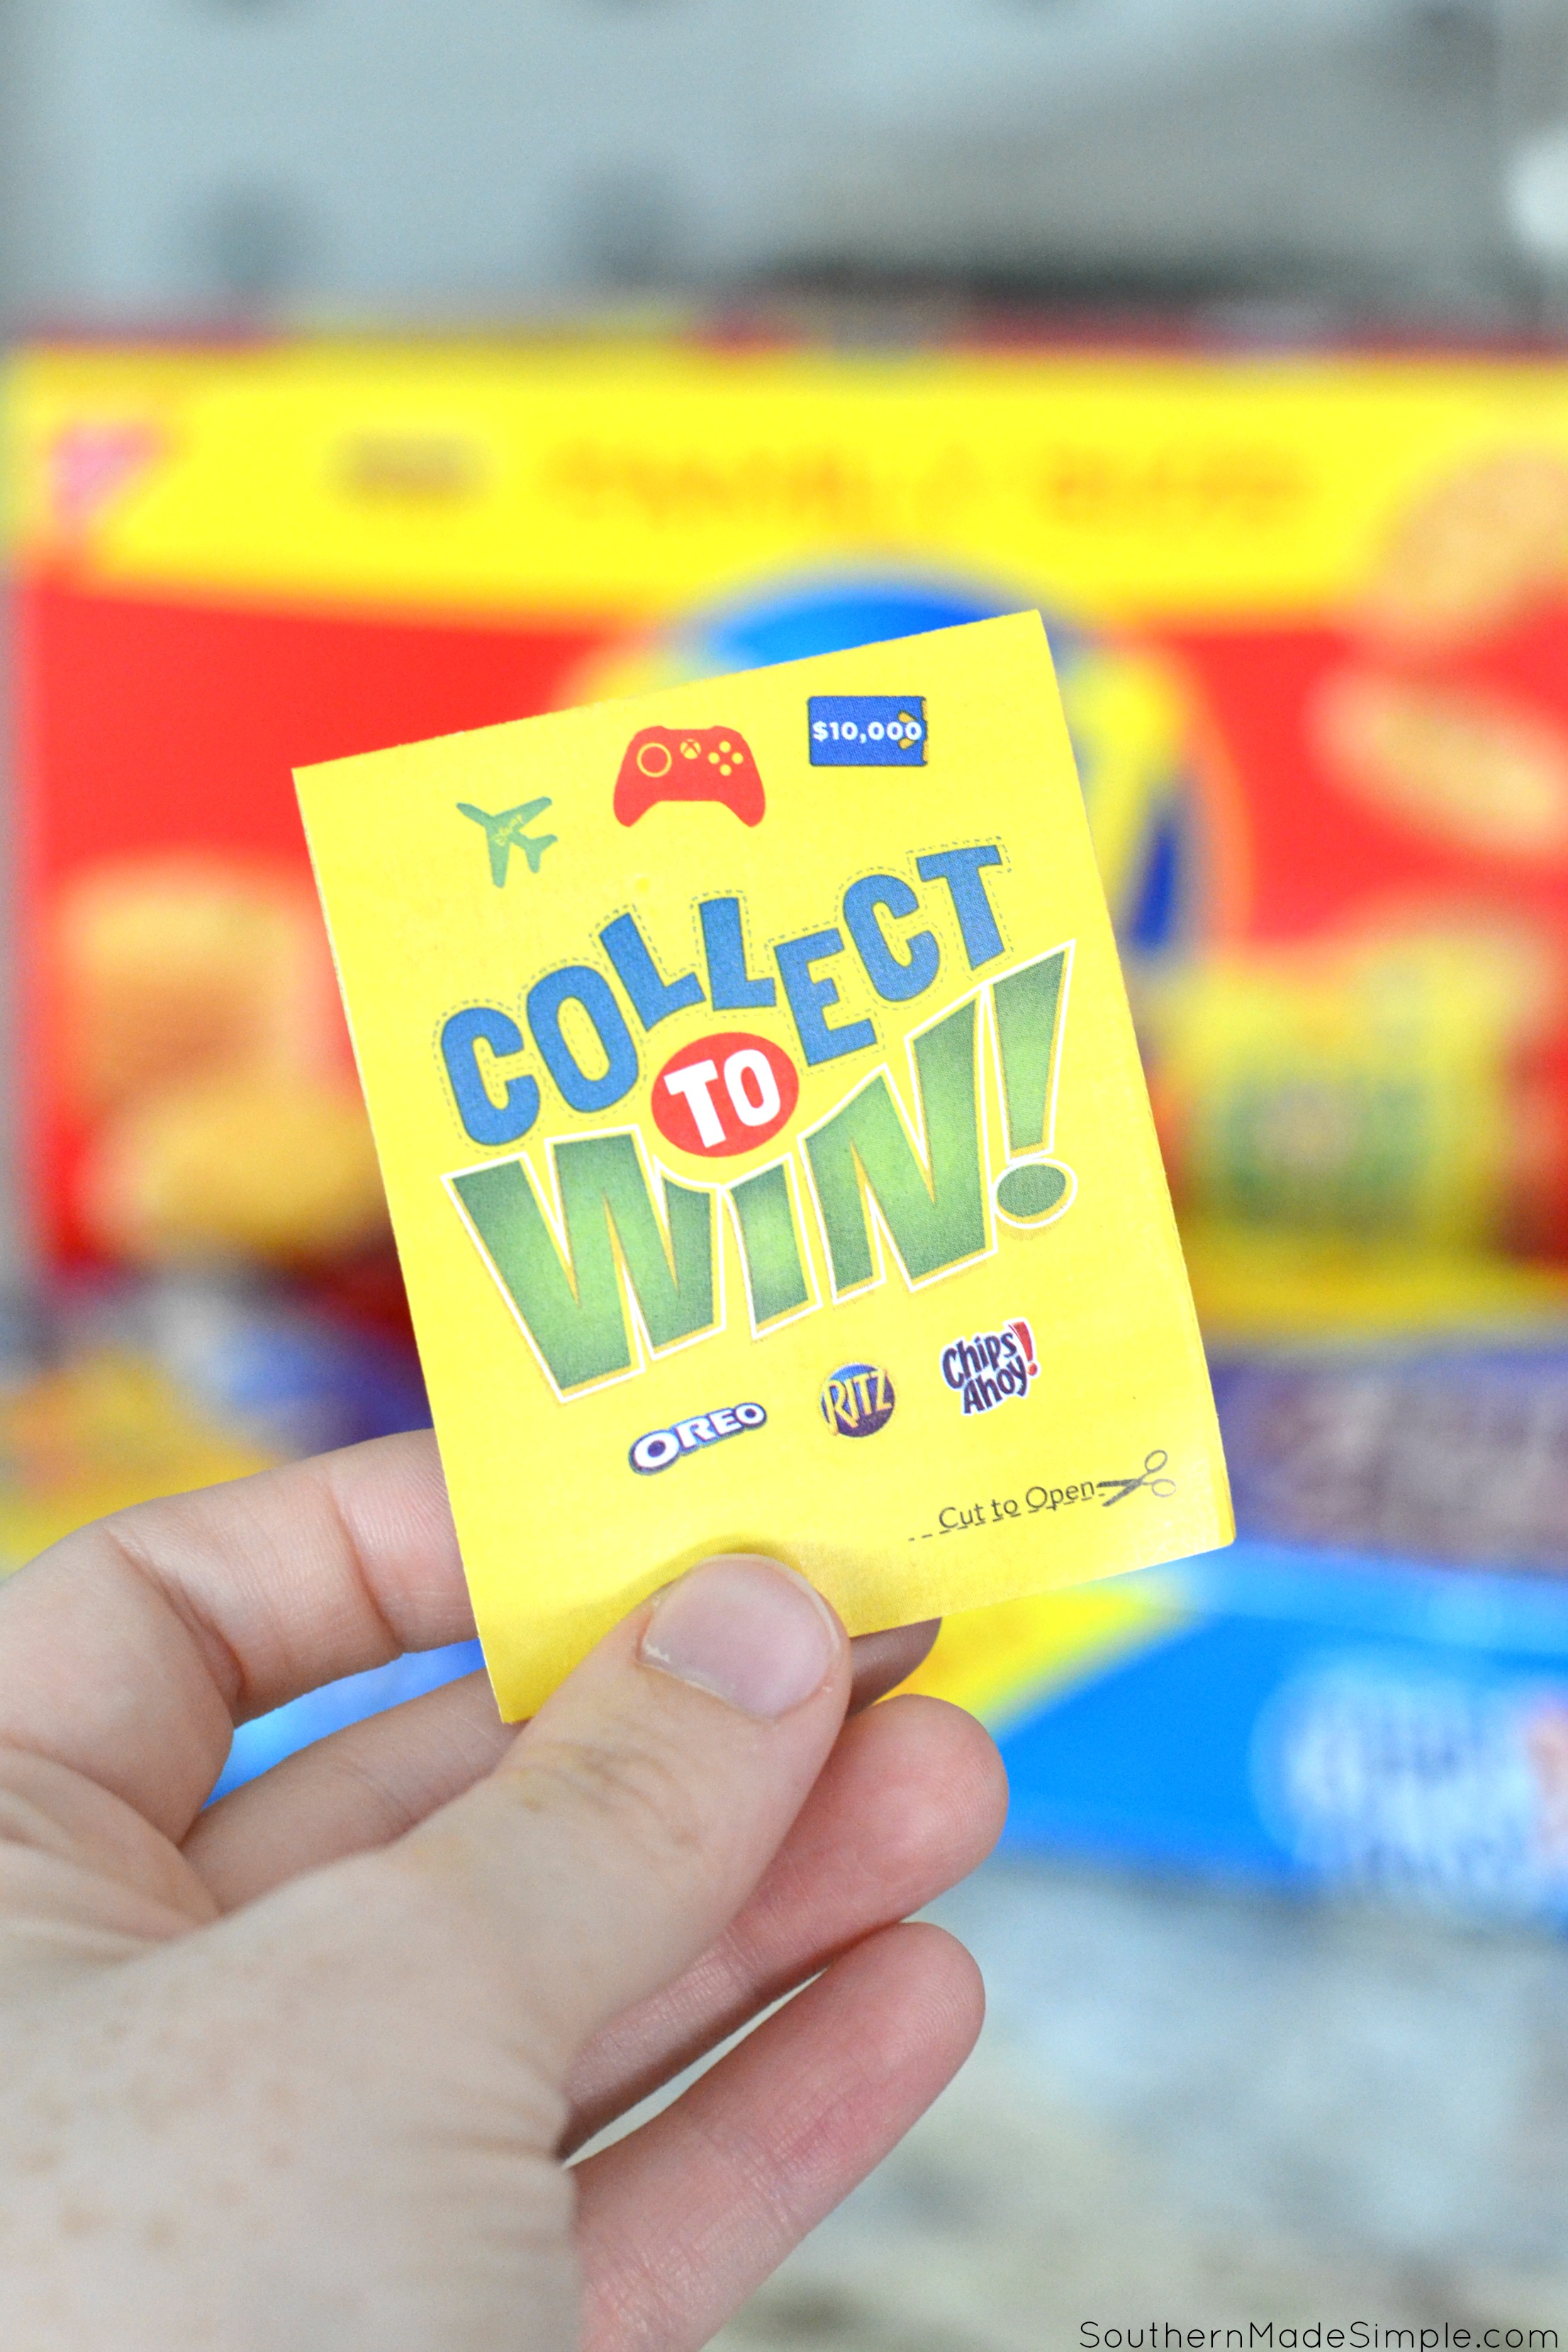 Stack your Snacks and Collect to Win! + Sweepstakes